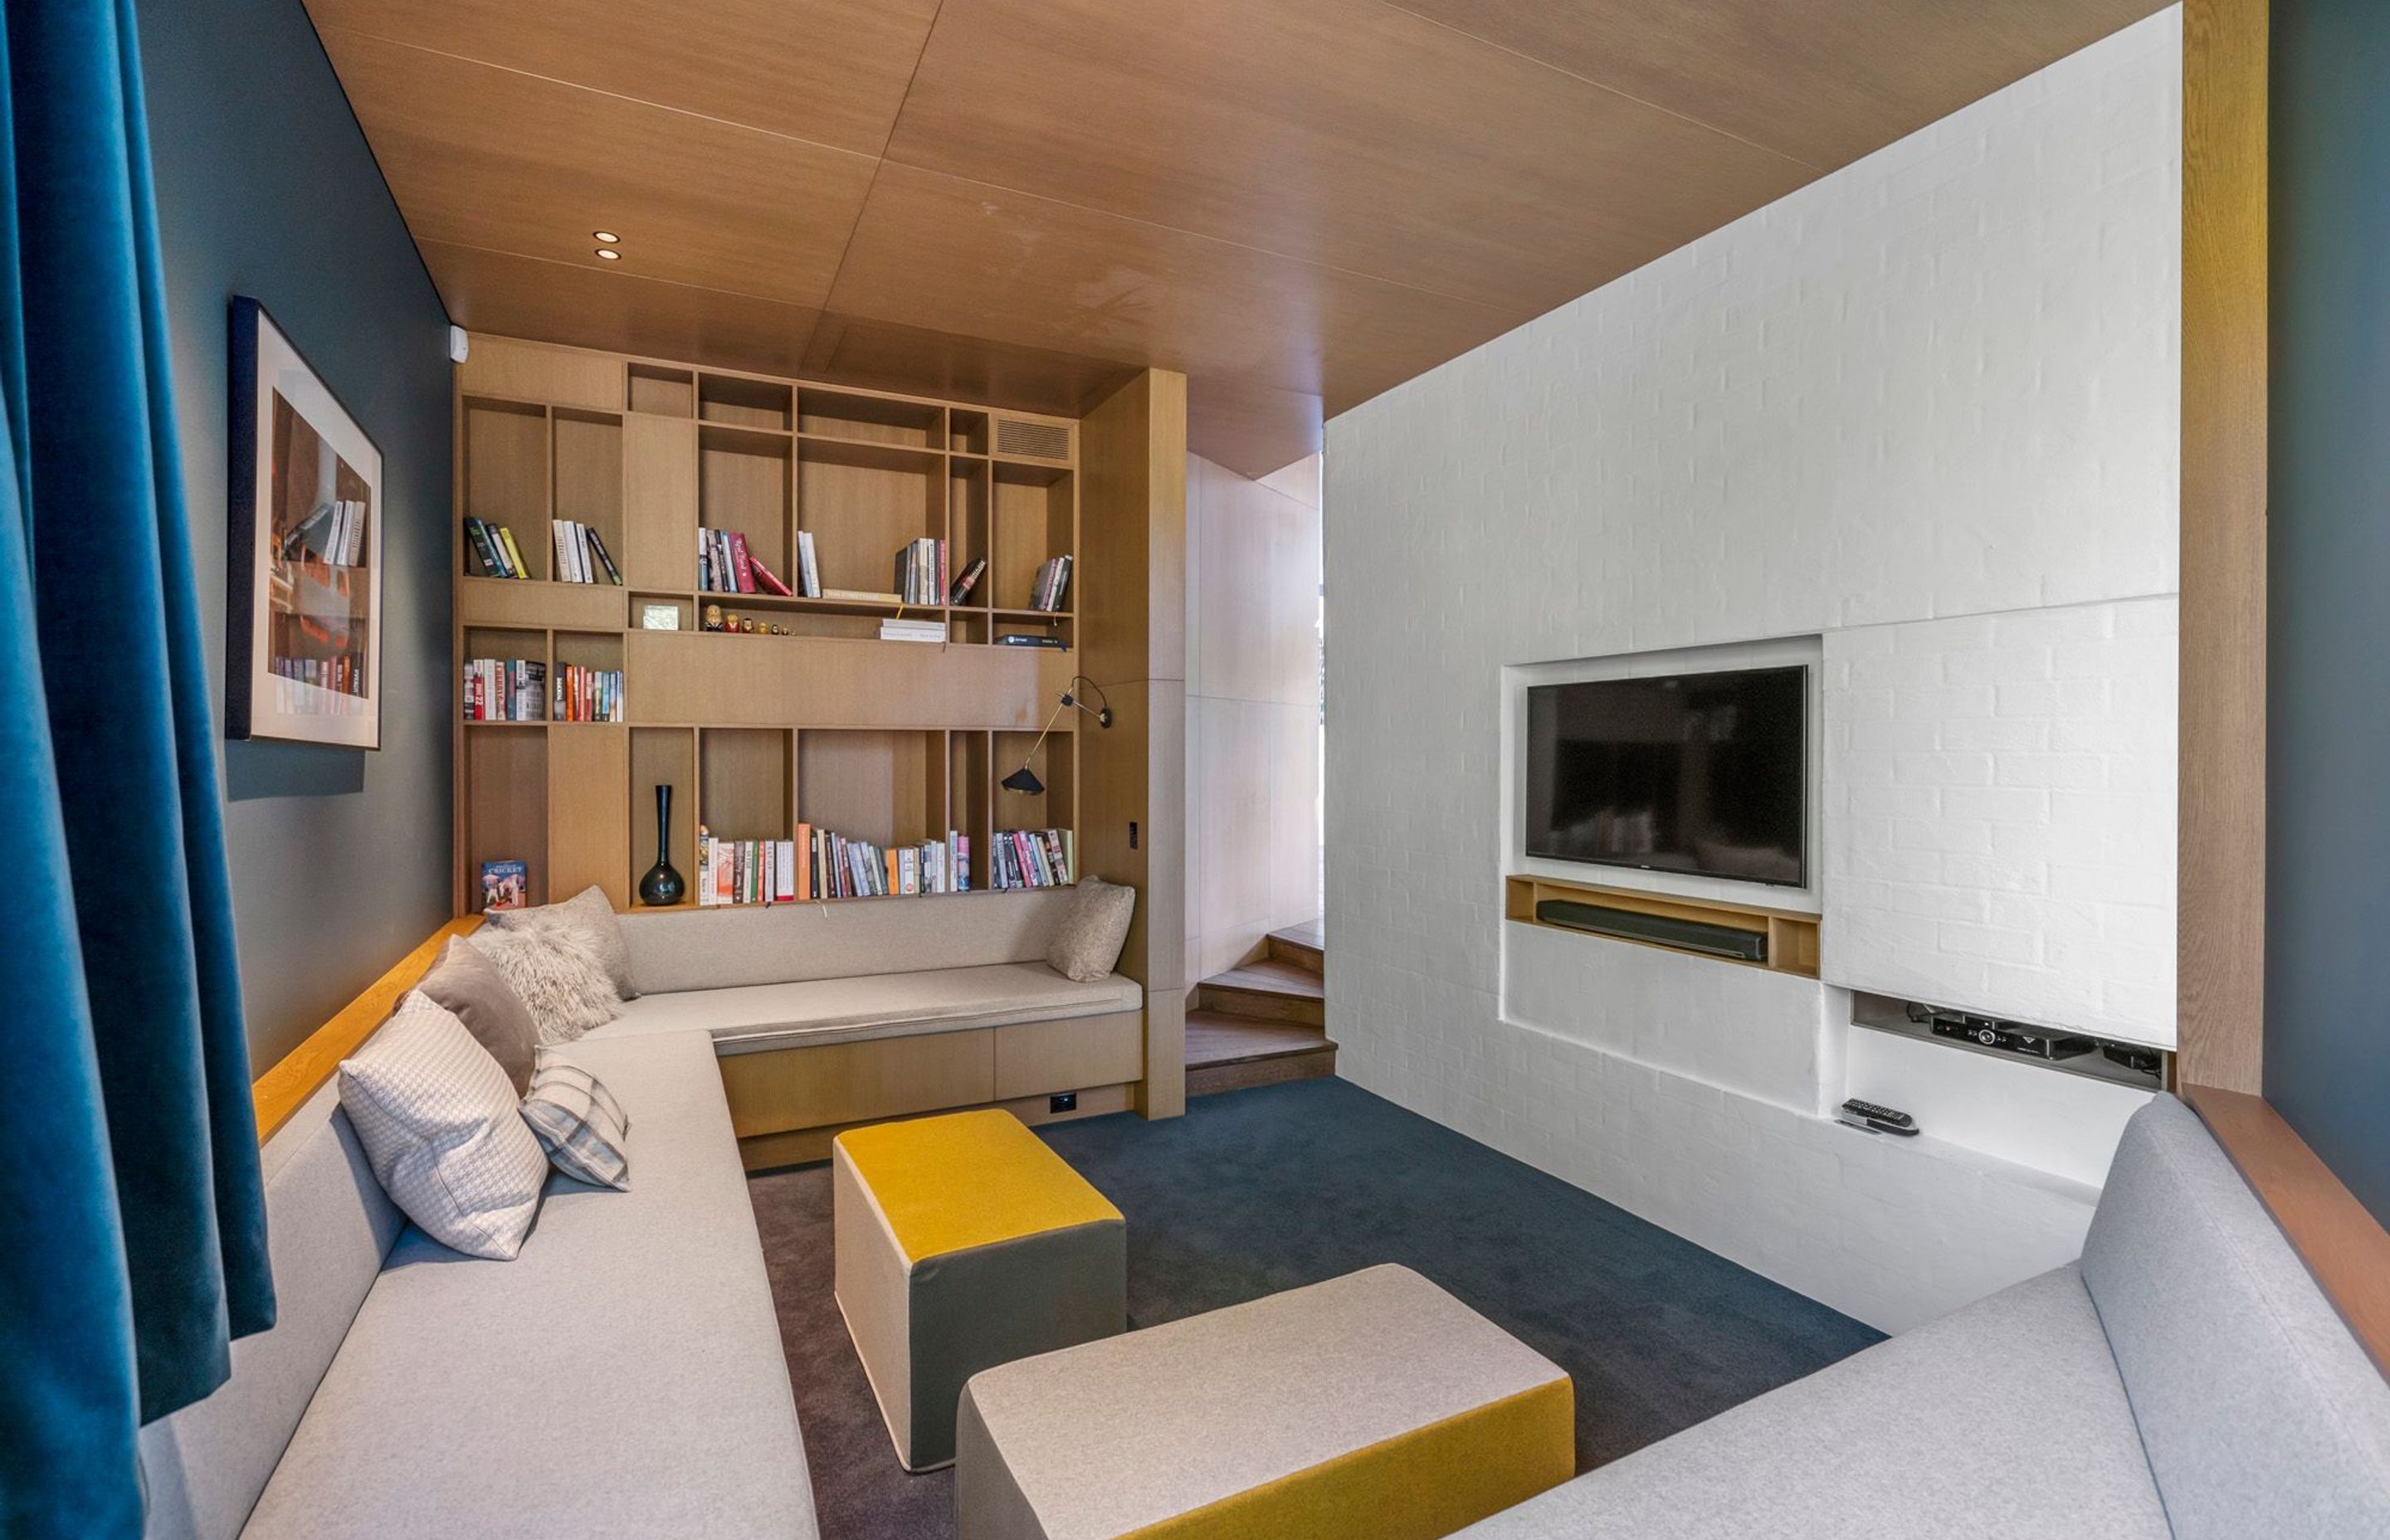 The snug acts as a media room, a library and a space for the children to make dens out of the cushions from the bench-style seating that lines three walls of the space.